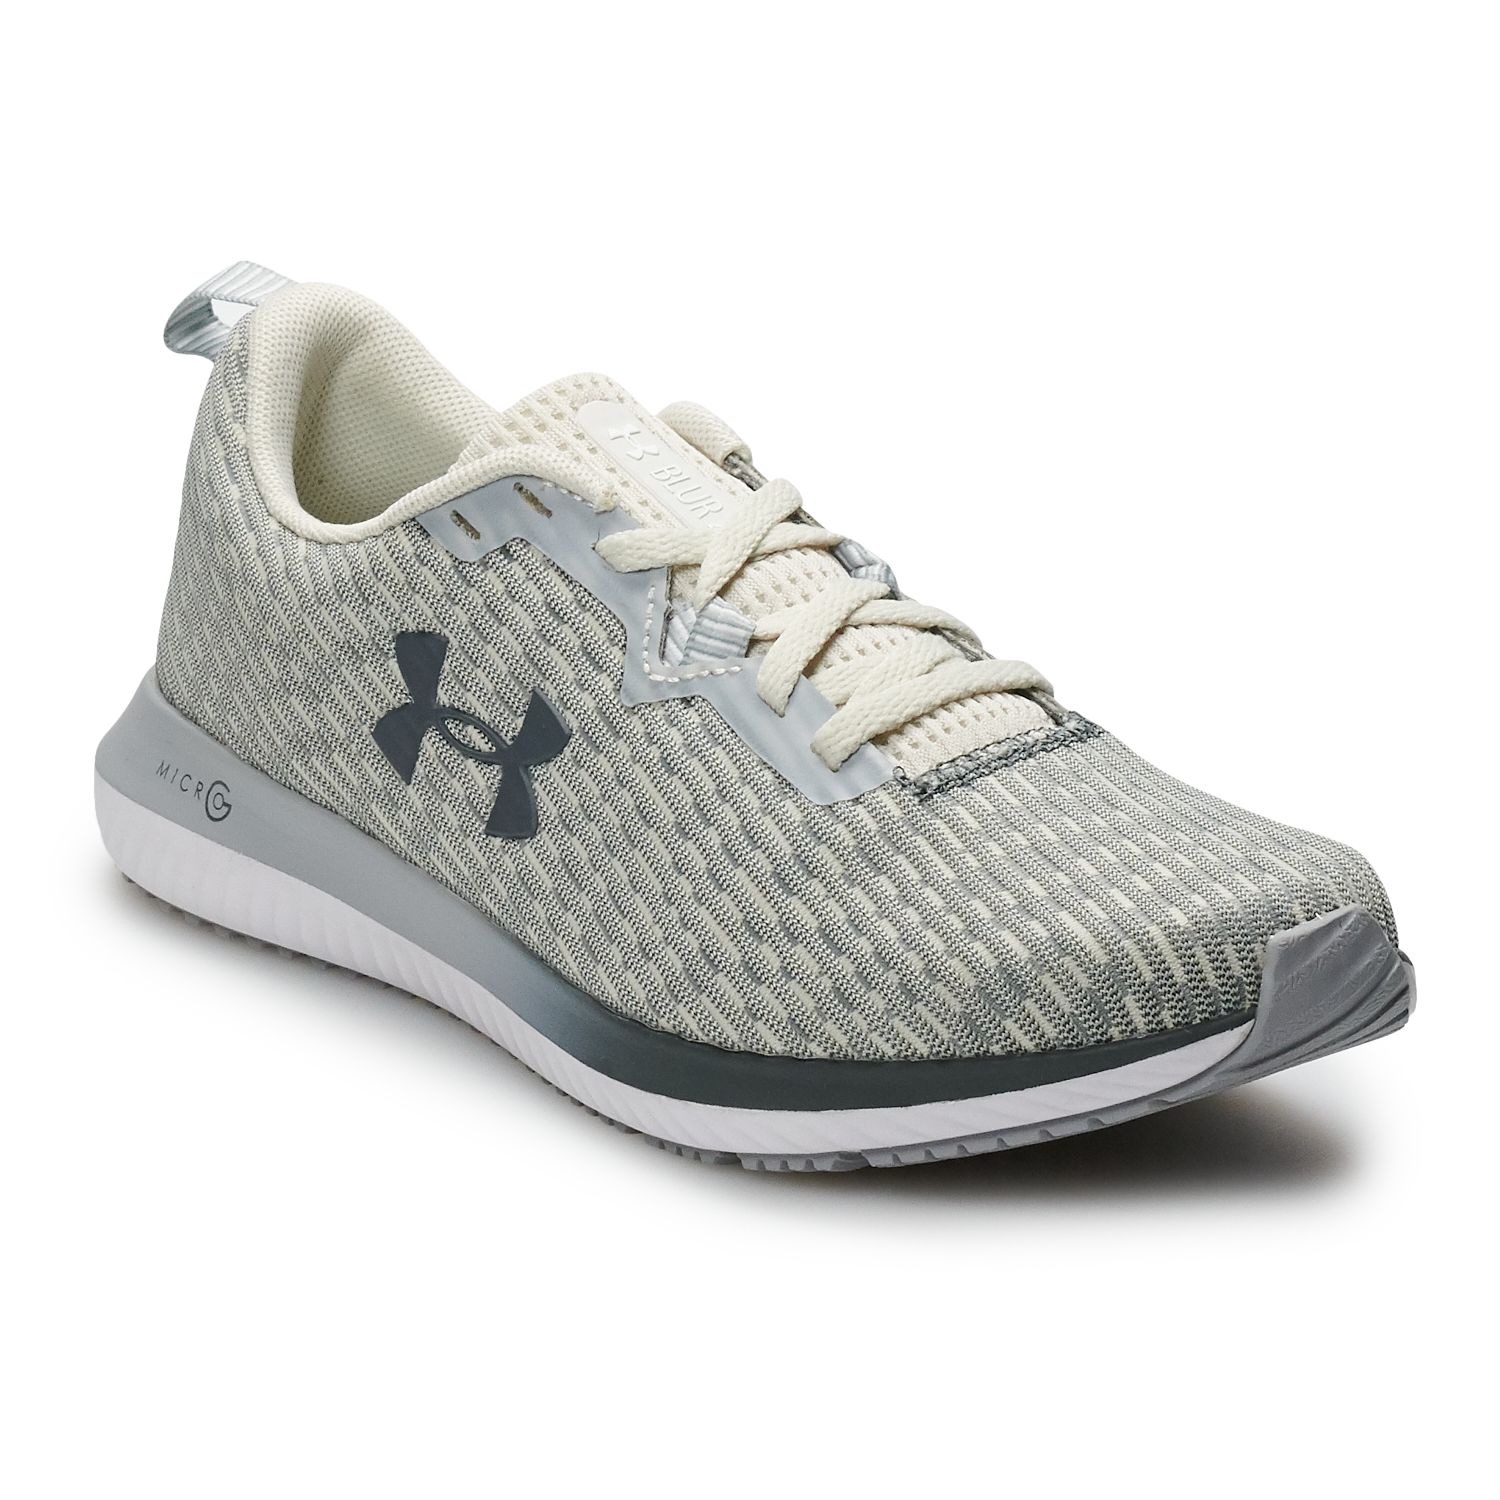 under armour micro g sneakers